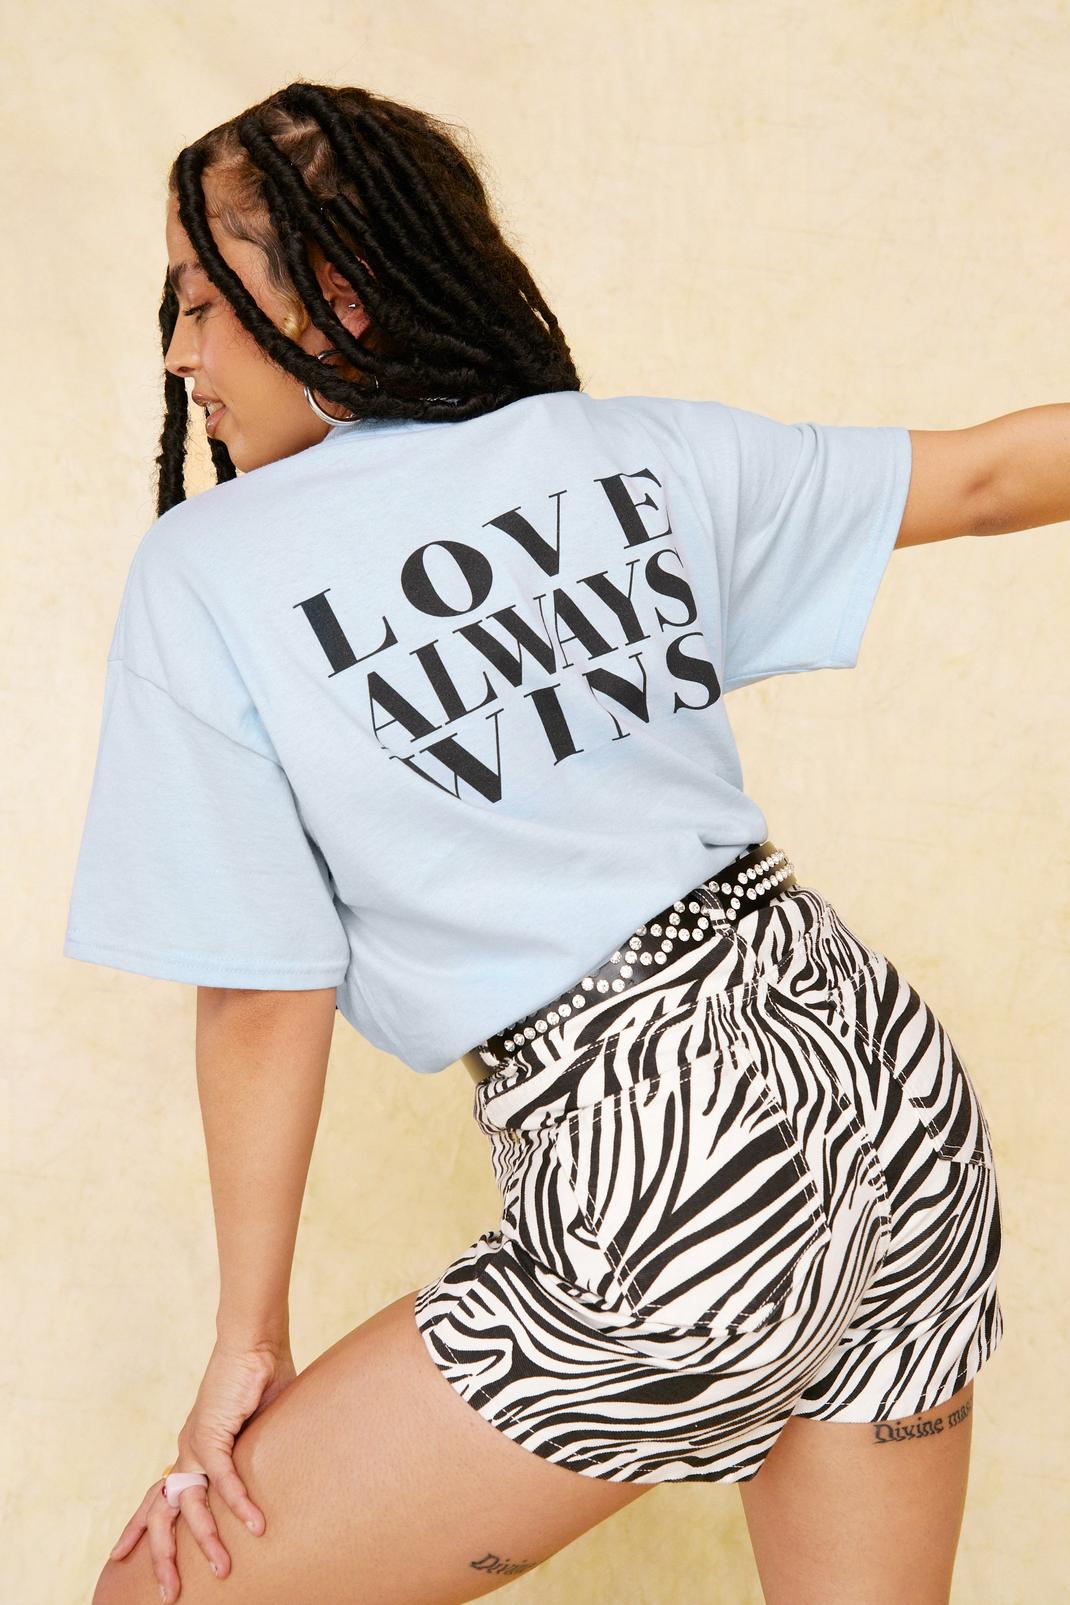 Blue Love Always Wins Graphic T-Shirt image number 1